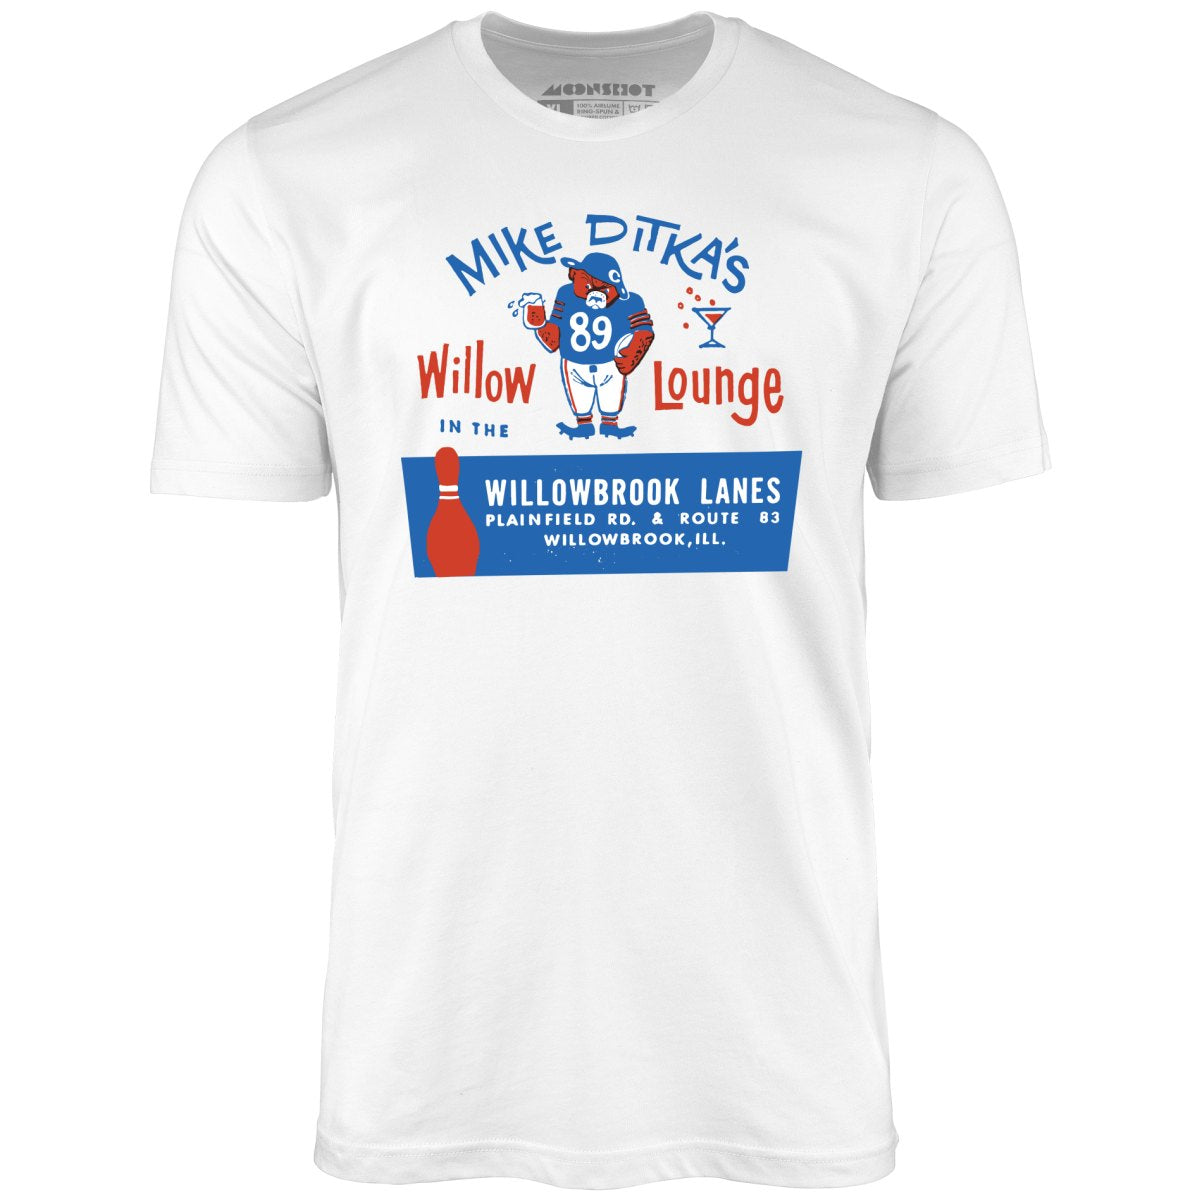 Mike Ditka's Willow Lounge - Willowbrook, IL - Vintage Bowling Alley - Unisex T-Shirt